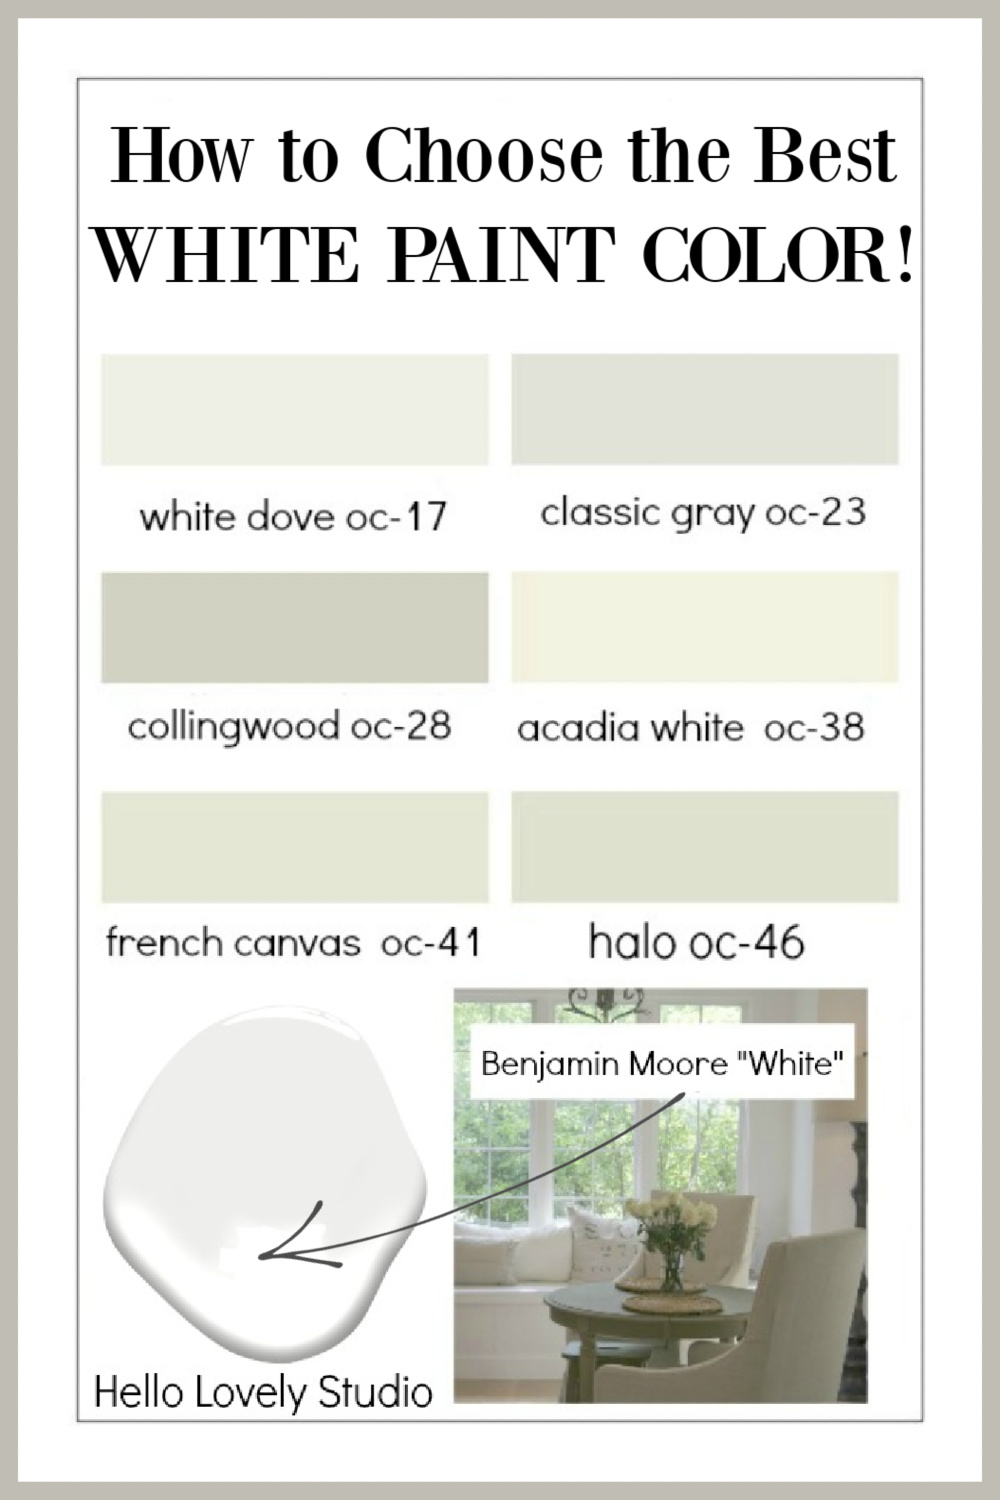 How to Choose the Best White Paint Color for Interiors – Simply2moms